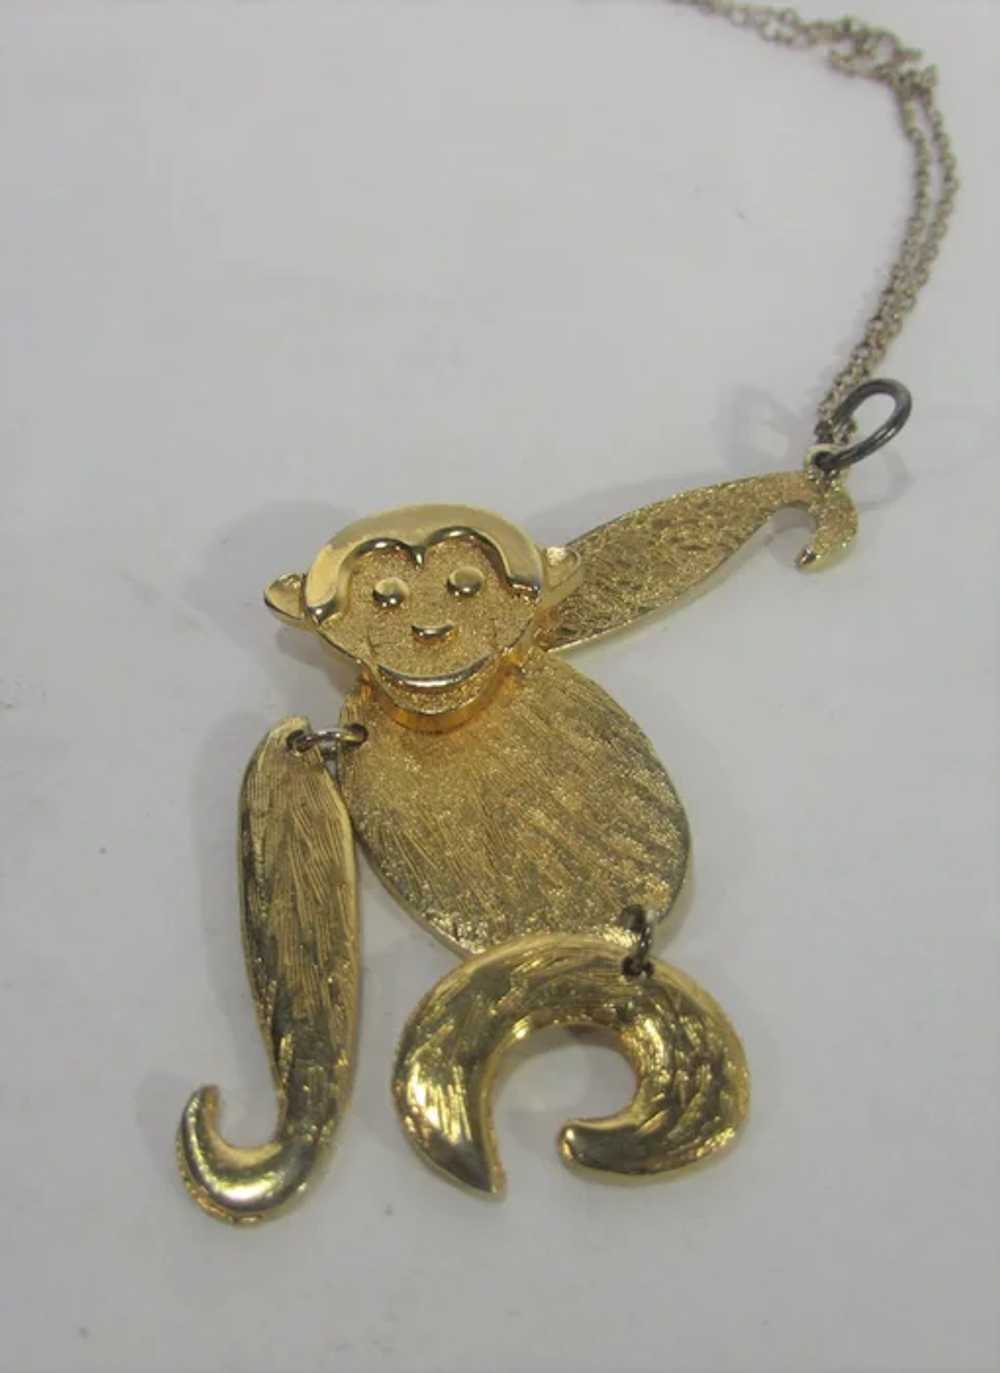 Gold Tone Jointed Monkey Pendant on a Chain - image 6